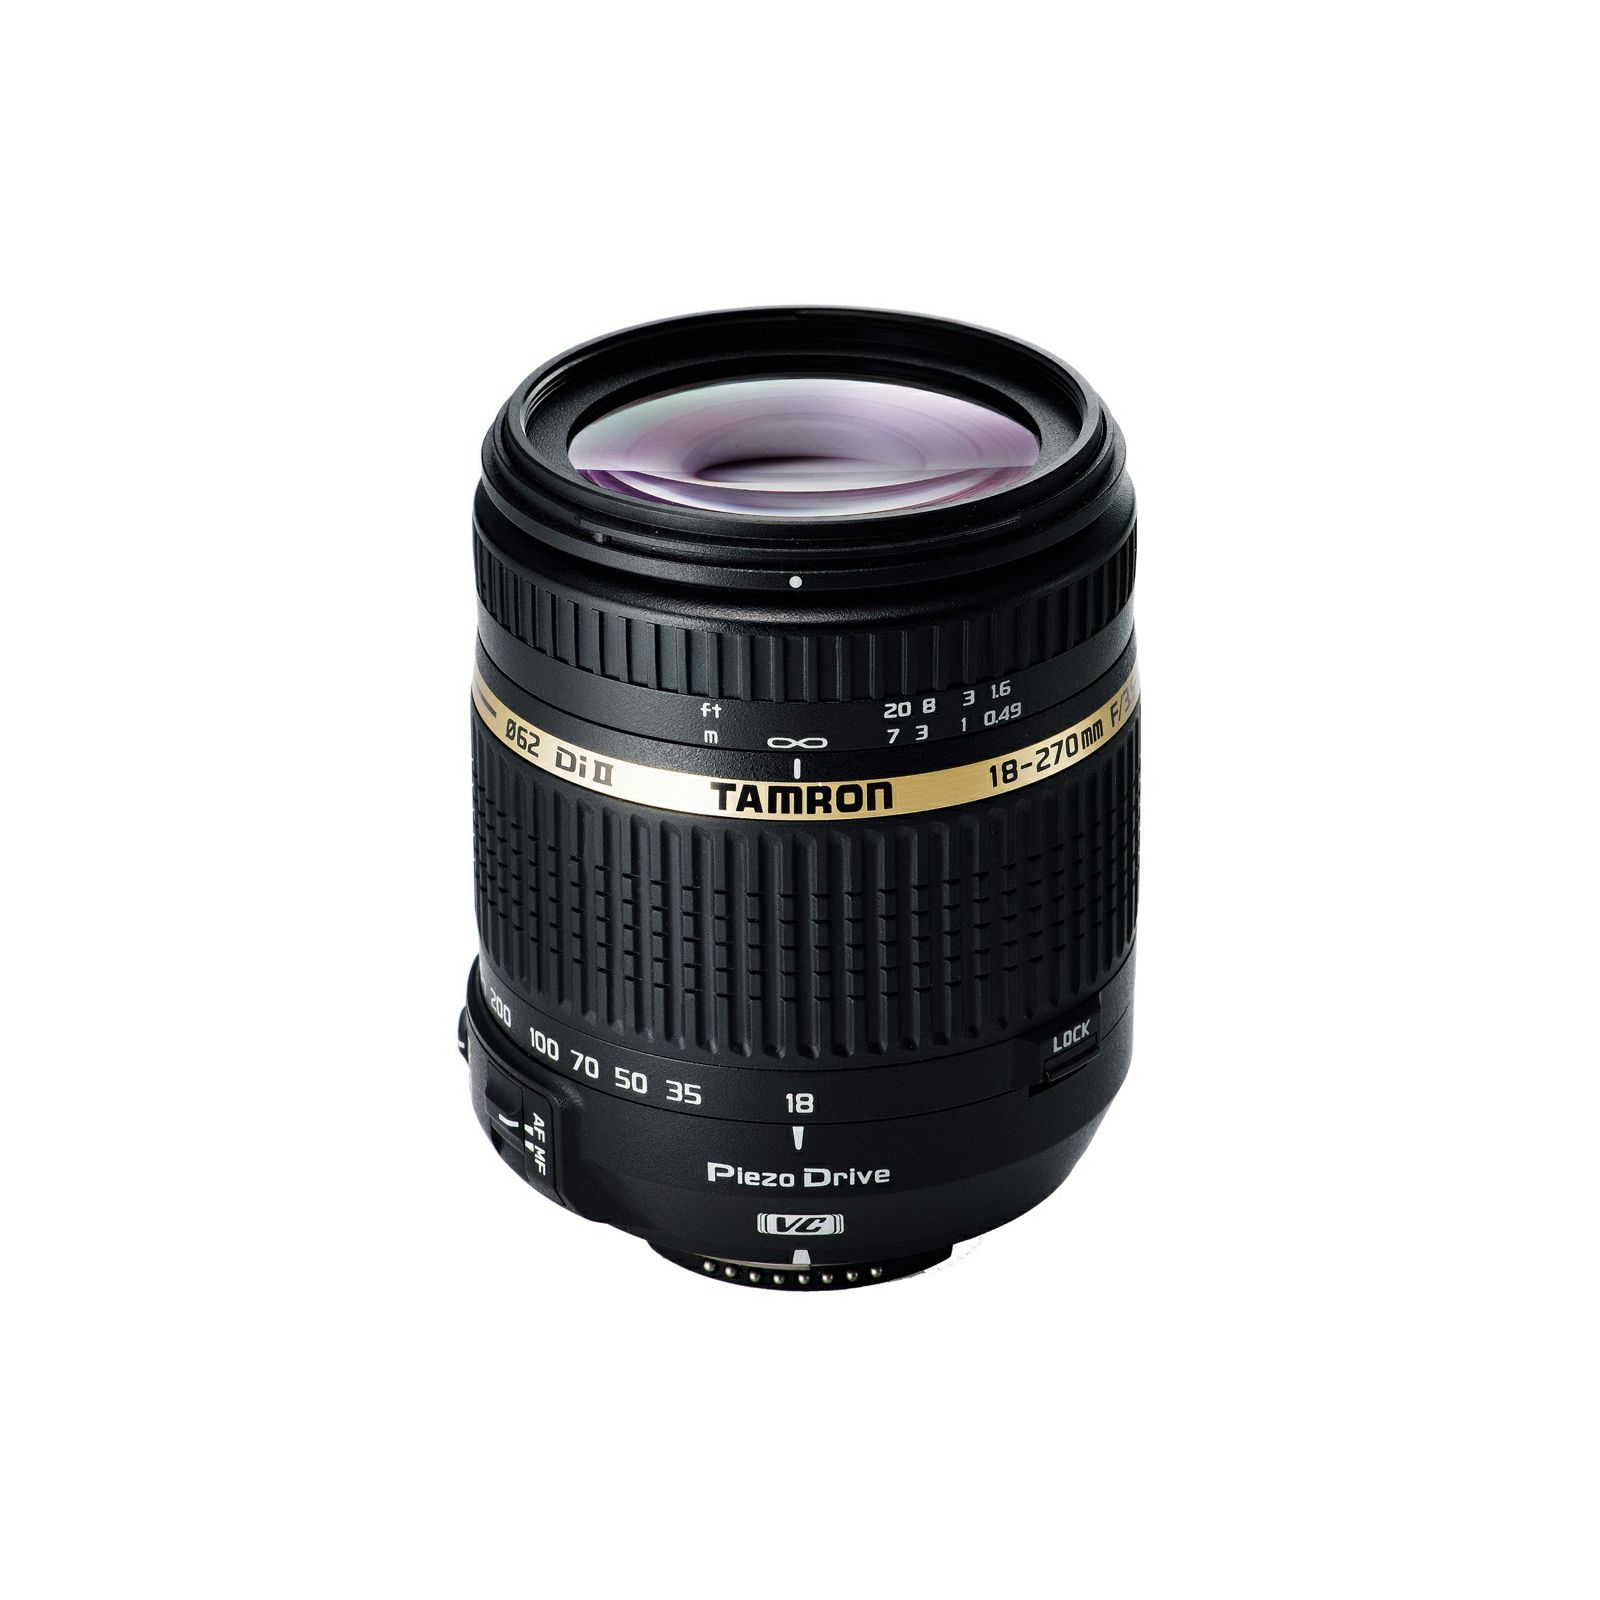 TAMRON AF 18-270mm F/3,5-6,3 Di II VC PZD for Nikon with built-in motor